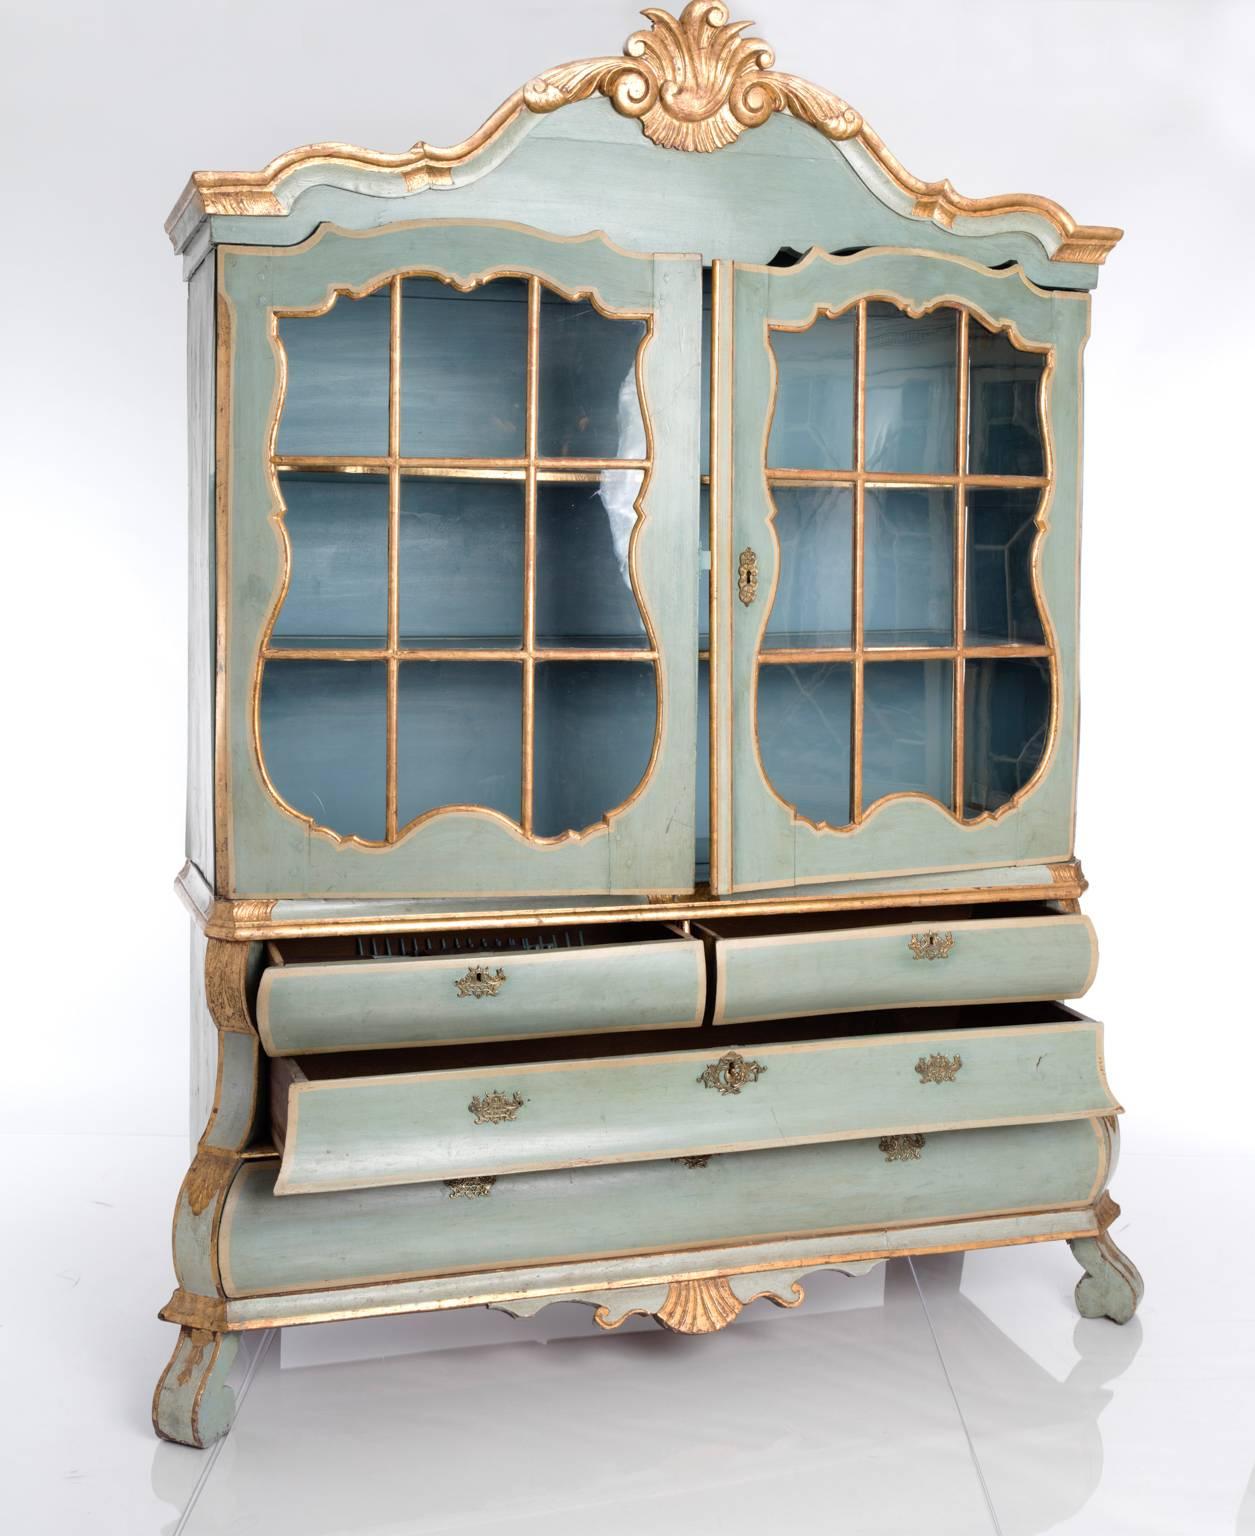 A blue-painted and partially gilt glass-fronted display cabinet with carved detailing, upper half with two glass doors and interior shelving, lower half with four drawers. Holland, late 18th century.
 